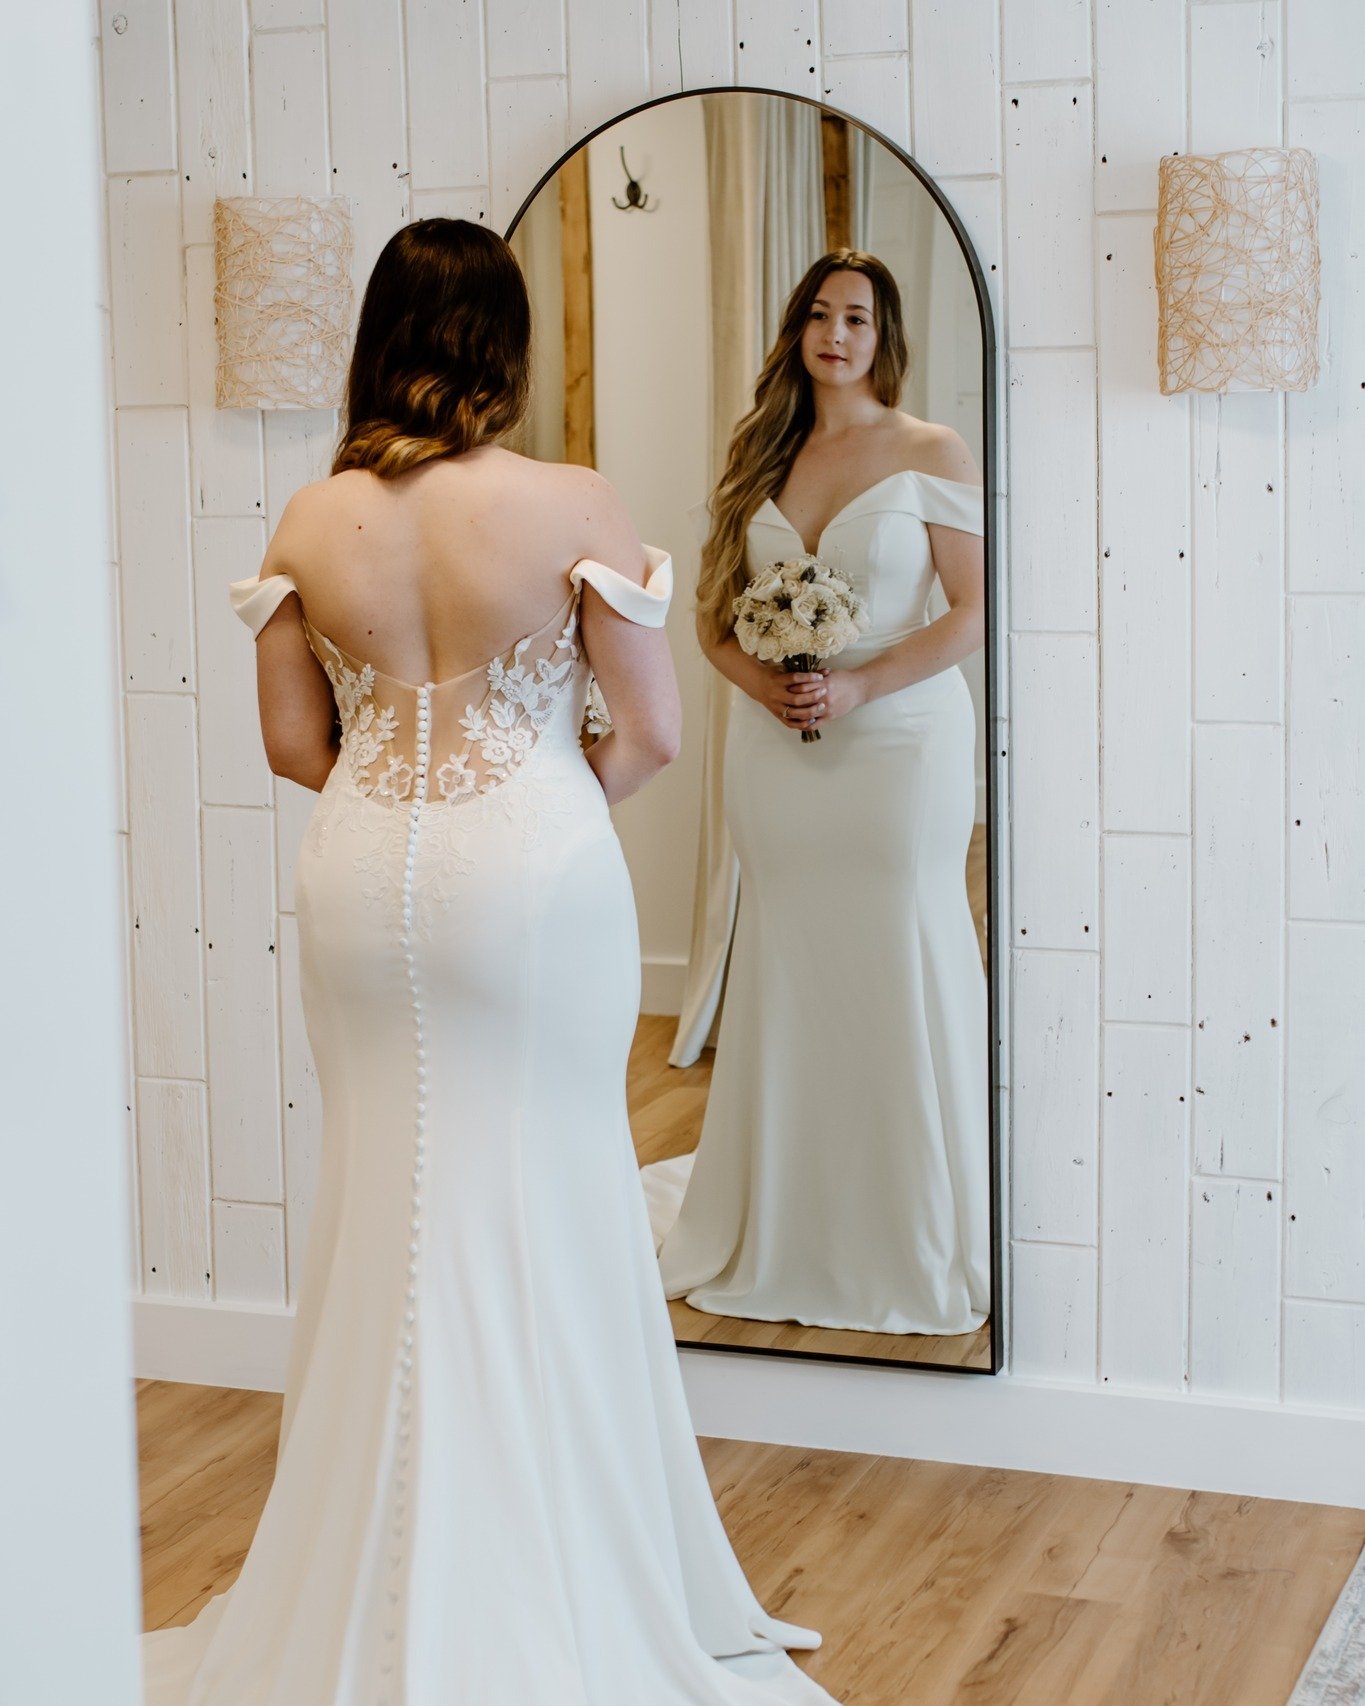 🤍 Happy Tuesday!!! / Bon Mardi!!! 🤍
...
Seriously!?! OMG!!! How can a dress look this good? Tiffany is wearing our bestselling new arrival, Colby, by Rebecca Ingram! Swipe to see more pictures of the back of the dress on her??? / S&eacute;rieusemen